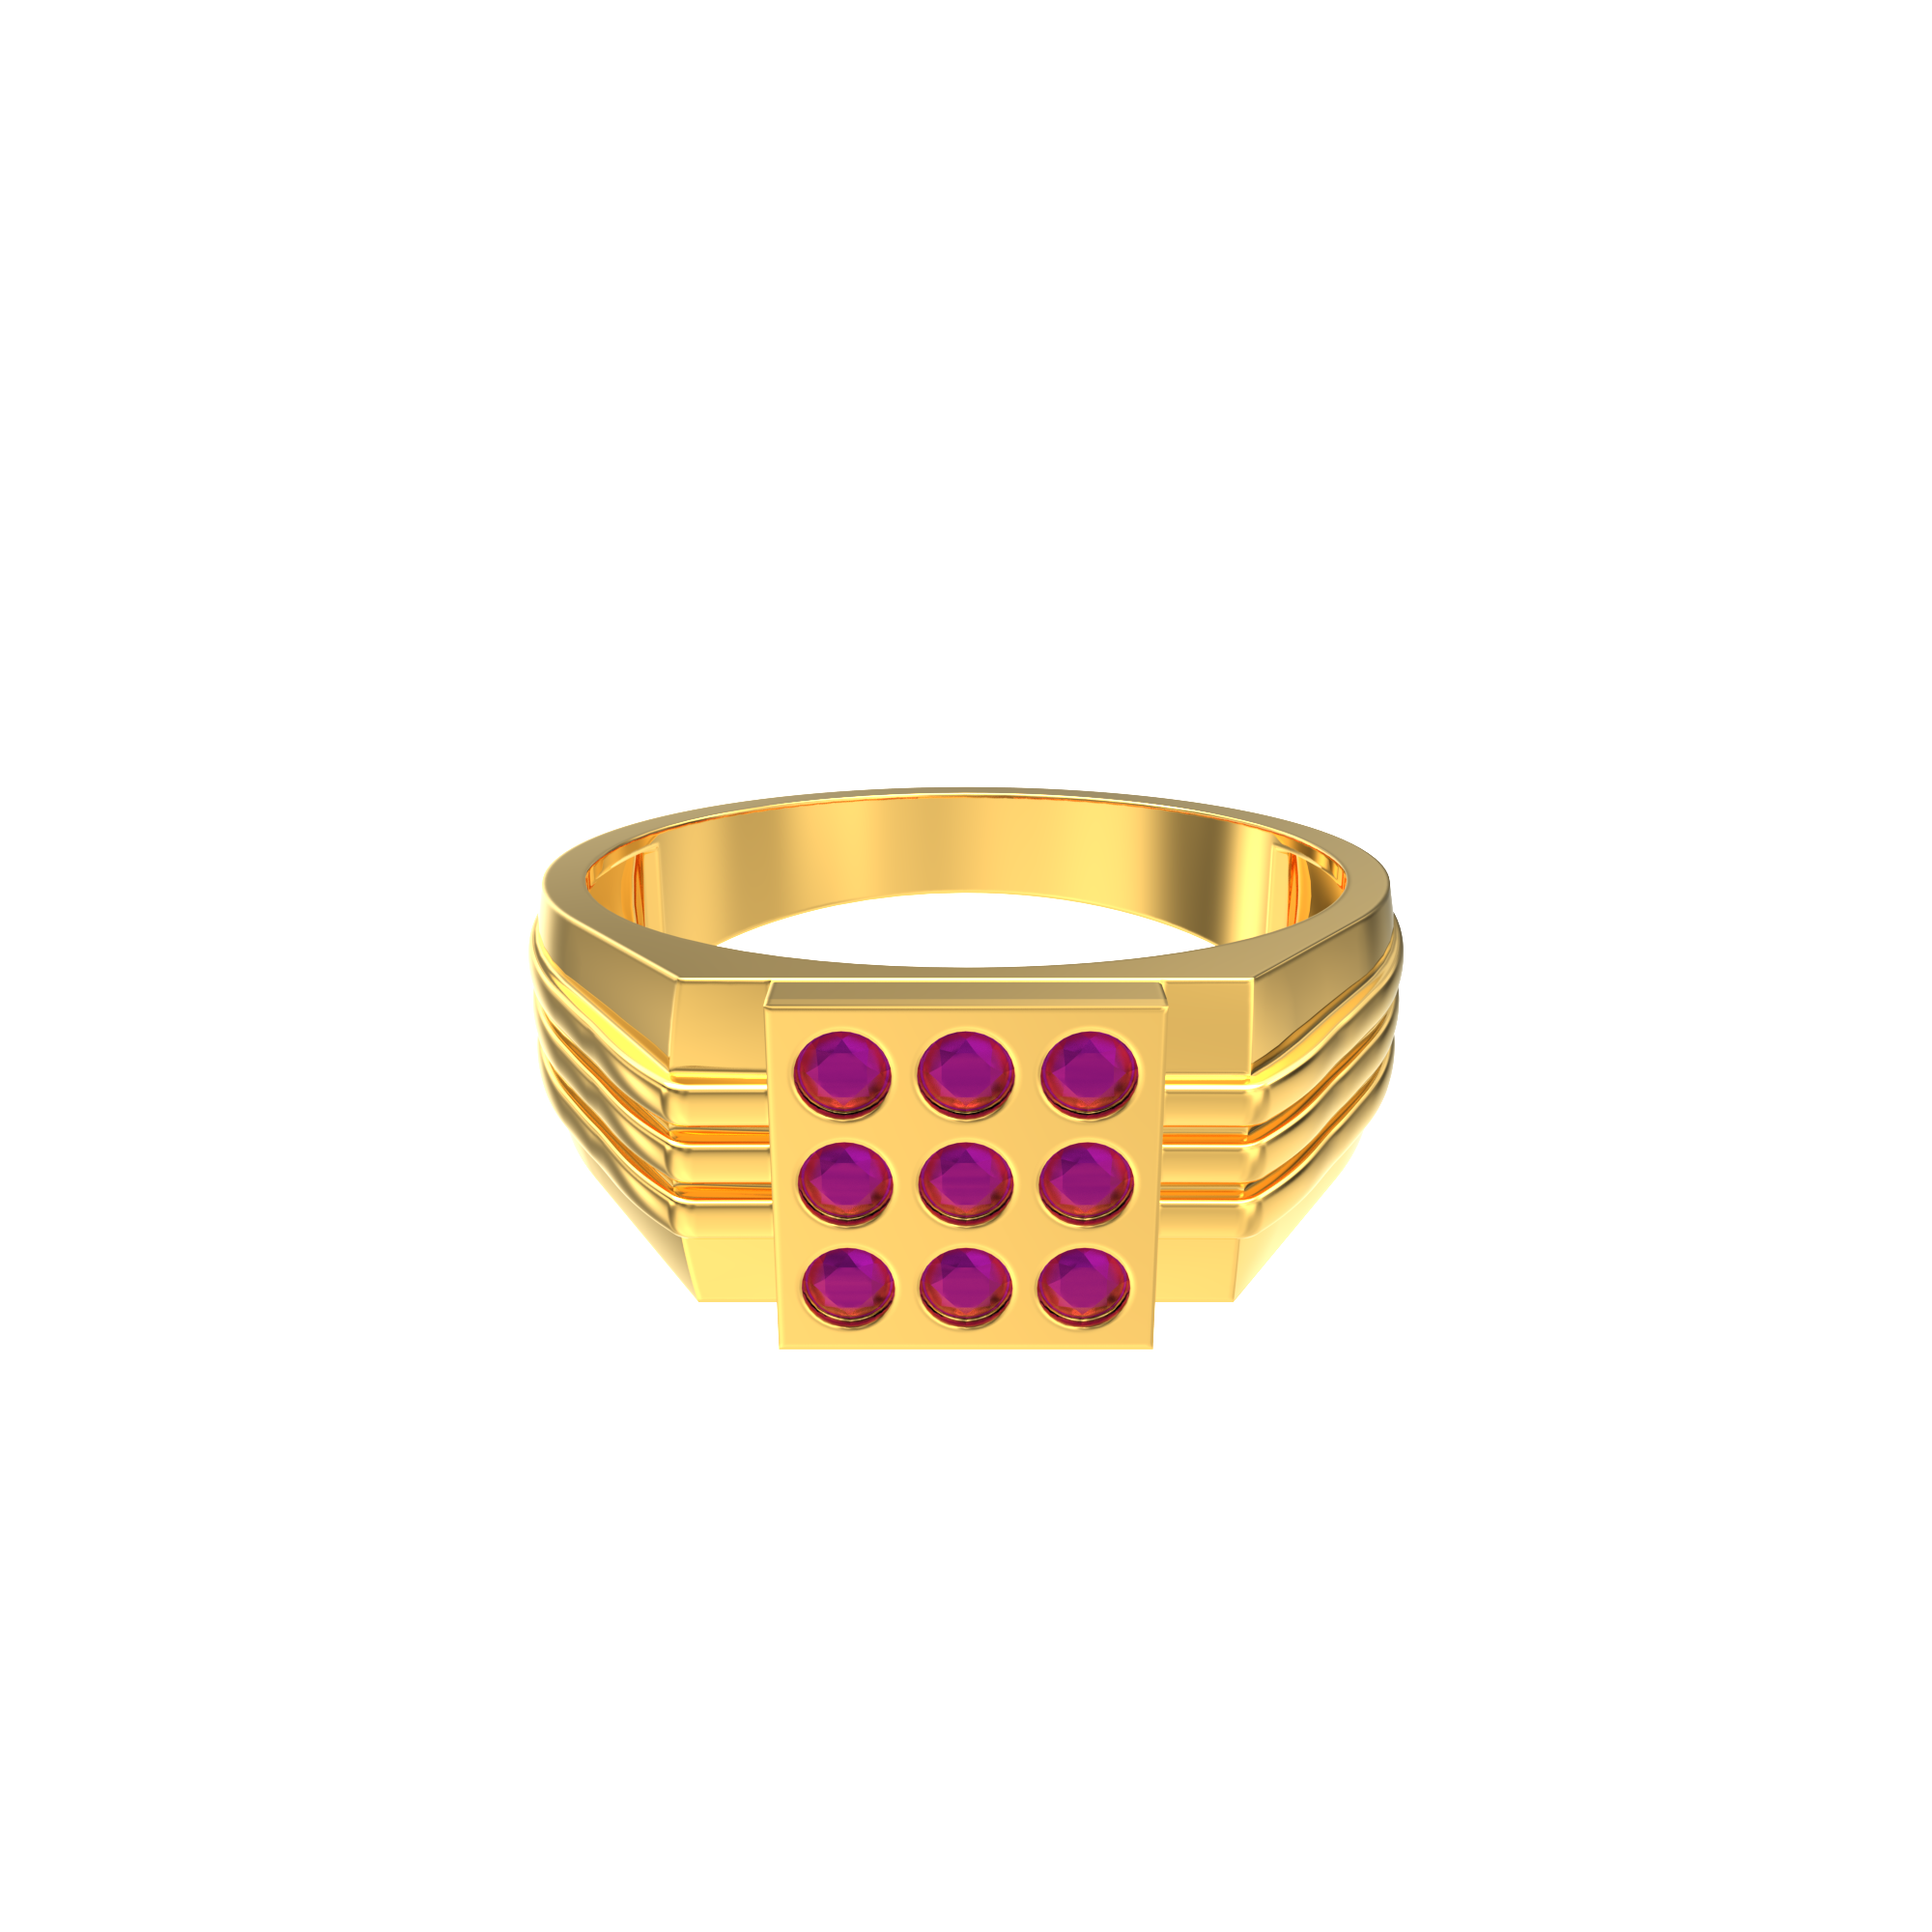 Solid 14K Yellow Gold Heavy Large Diamond Cut Mens Nugget Ring, Size 5 - 15  XXL - Jahda Jewelry Company Custom Gold Rings, Necklaces, Bracelets &  Earrings - Sacramento, California